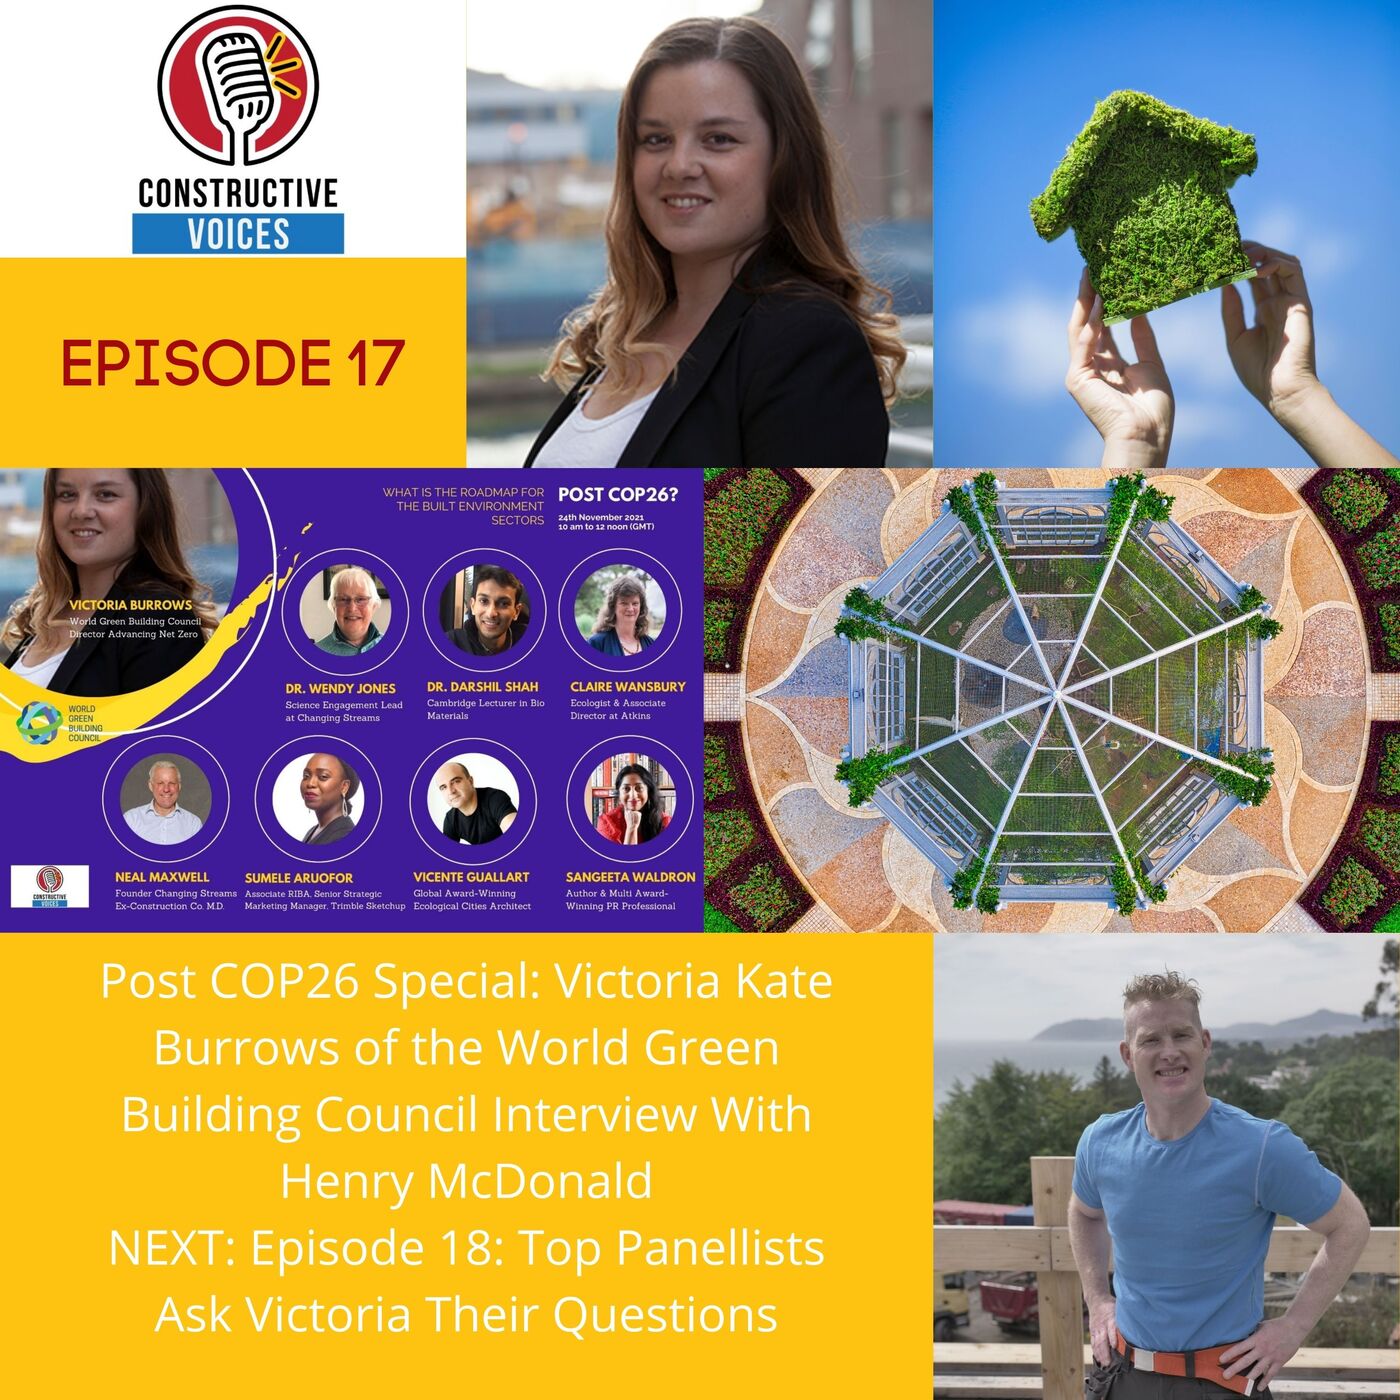 Post COP26 Special: Victoria Kate Burrows of the World Green Building Council Interview With Henry McDonald